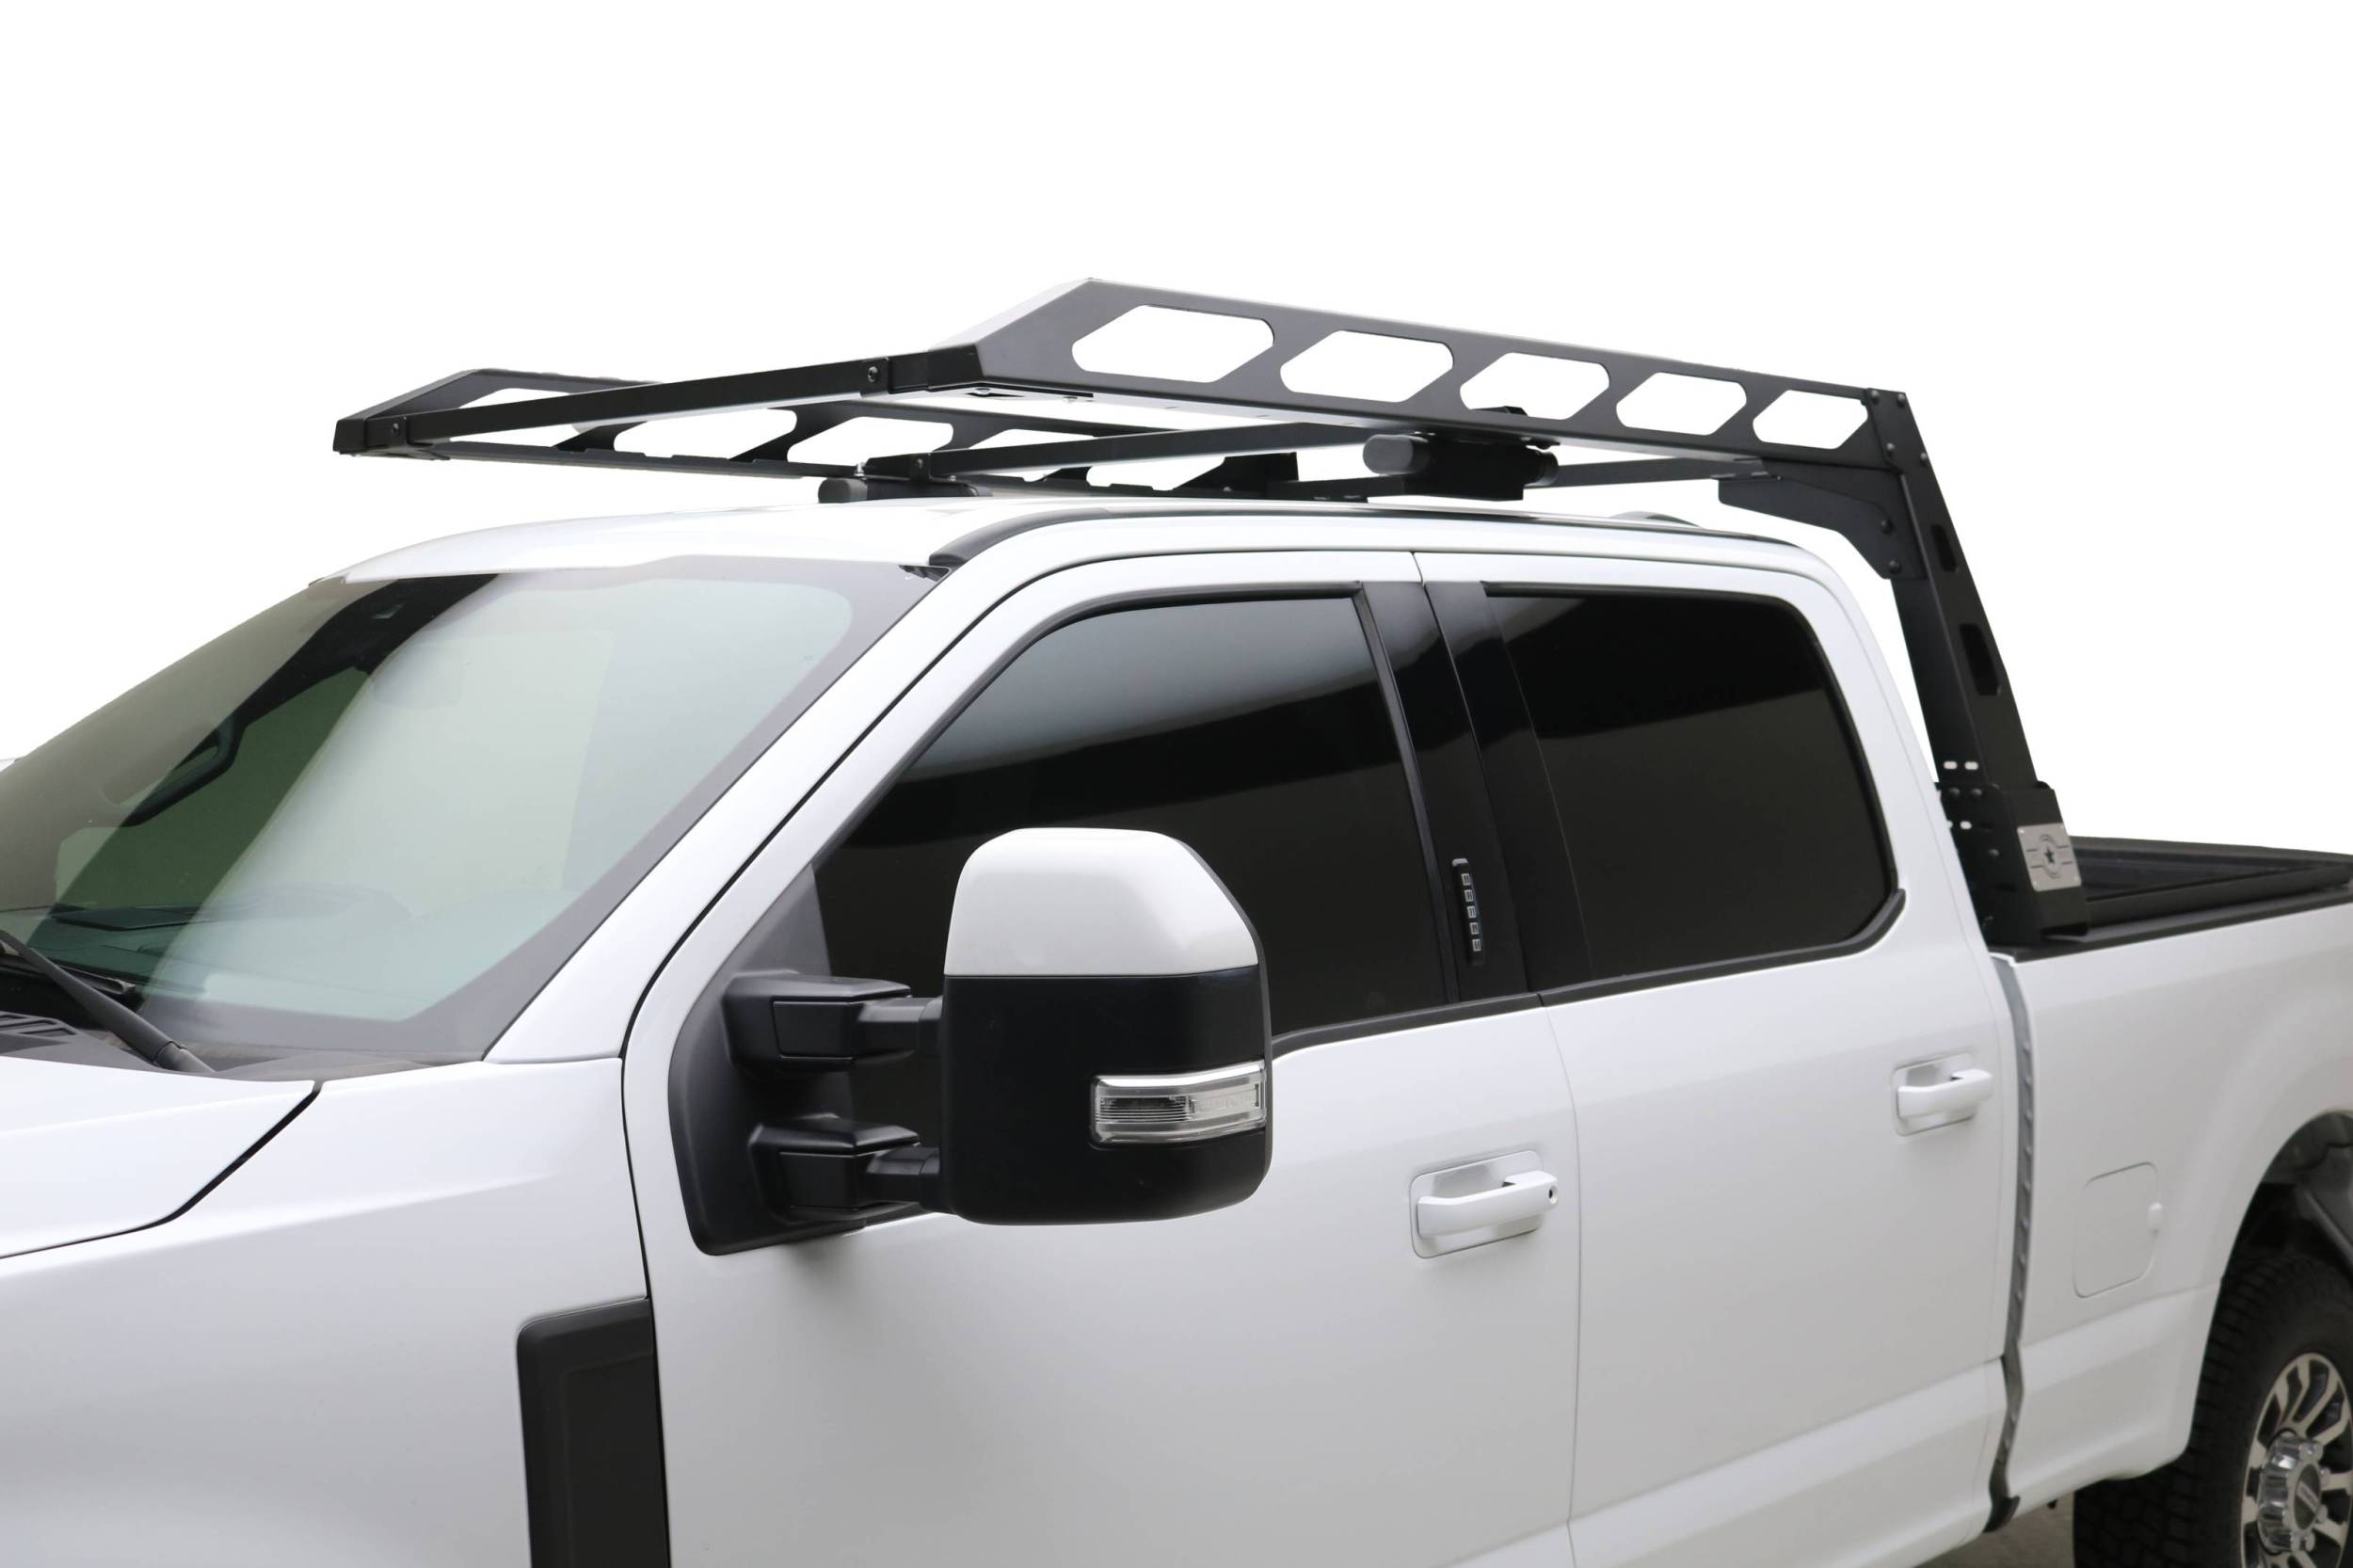 U.S. Rack - Universal 5th Wheel Rack for Full-Size GM, Ford, and Ram Trucks, Works with Most Bed Covers, Part No. 82510041